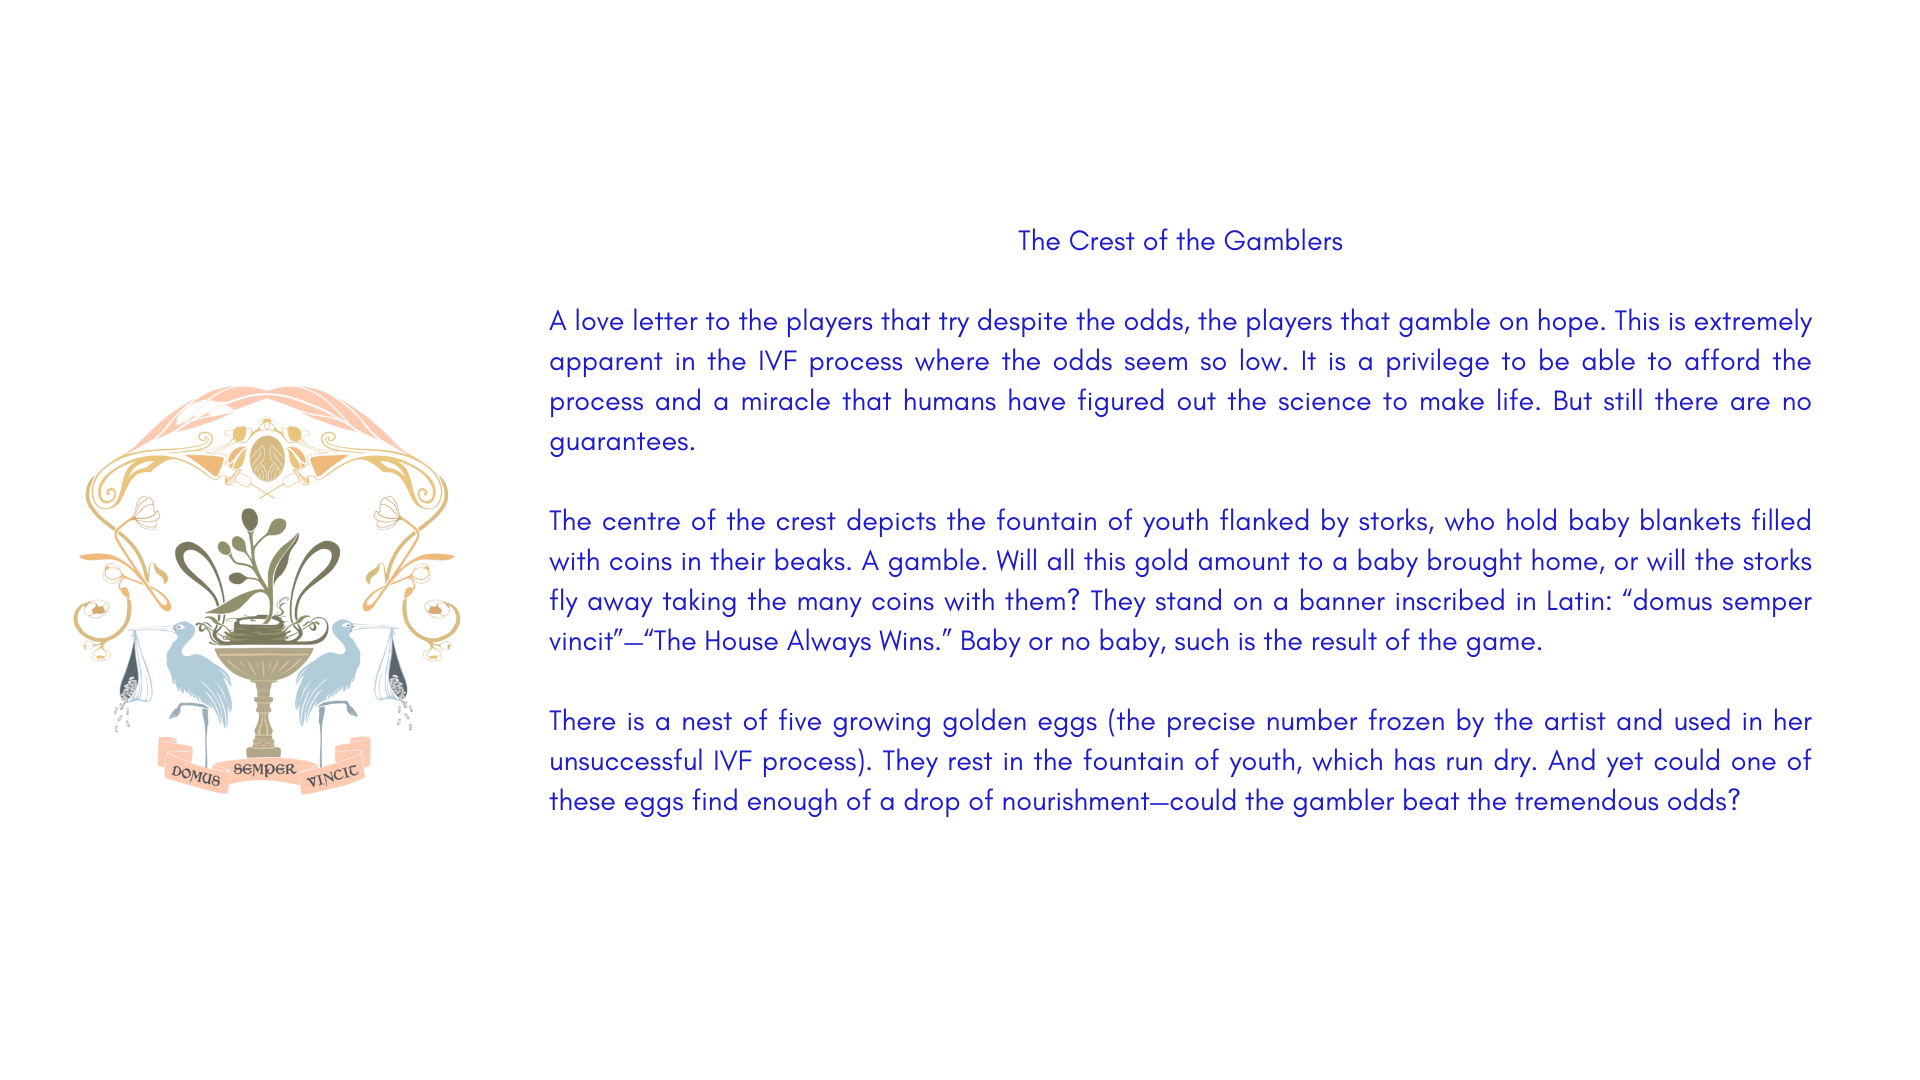   The Crest of the Gamblers,  Written Statement. 